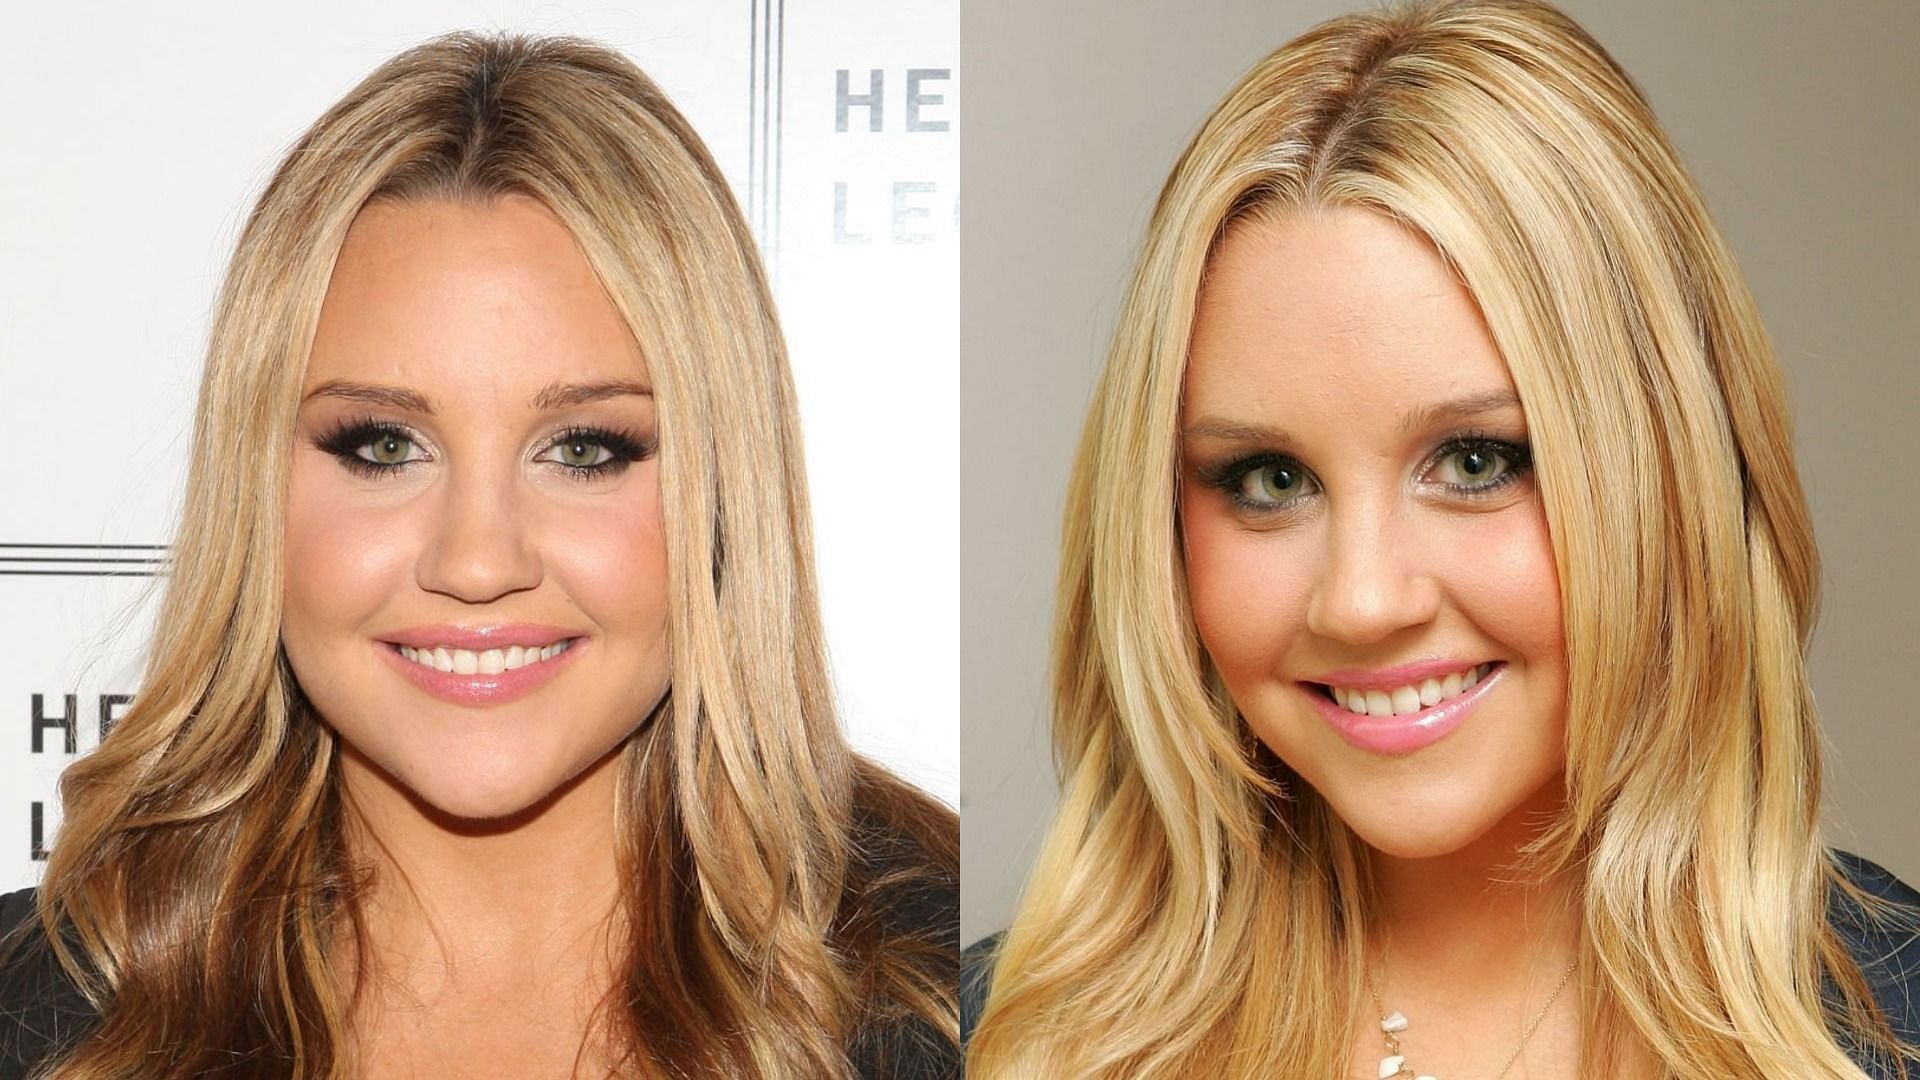 Amanda Bynes had filed to end her conservatorship after nearly a decade (Image via Getty Images/Bryan Bedder)